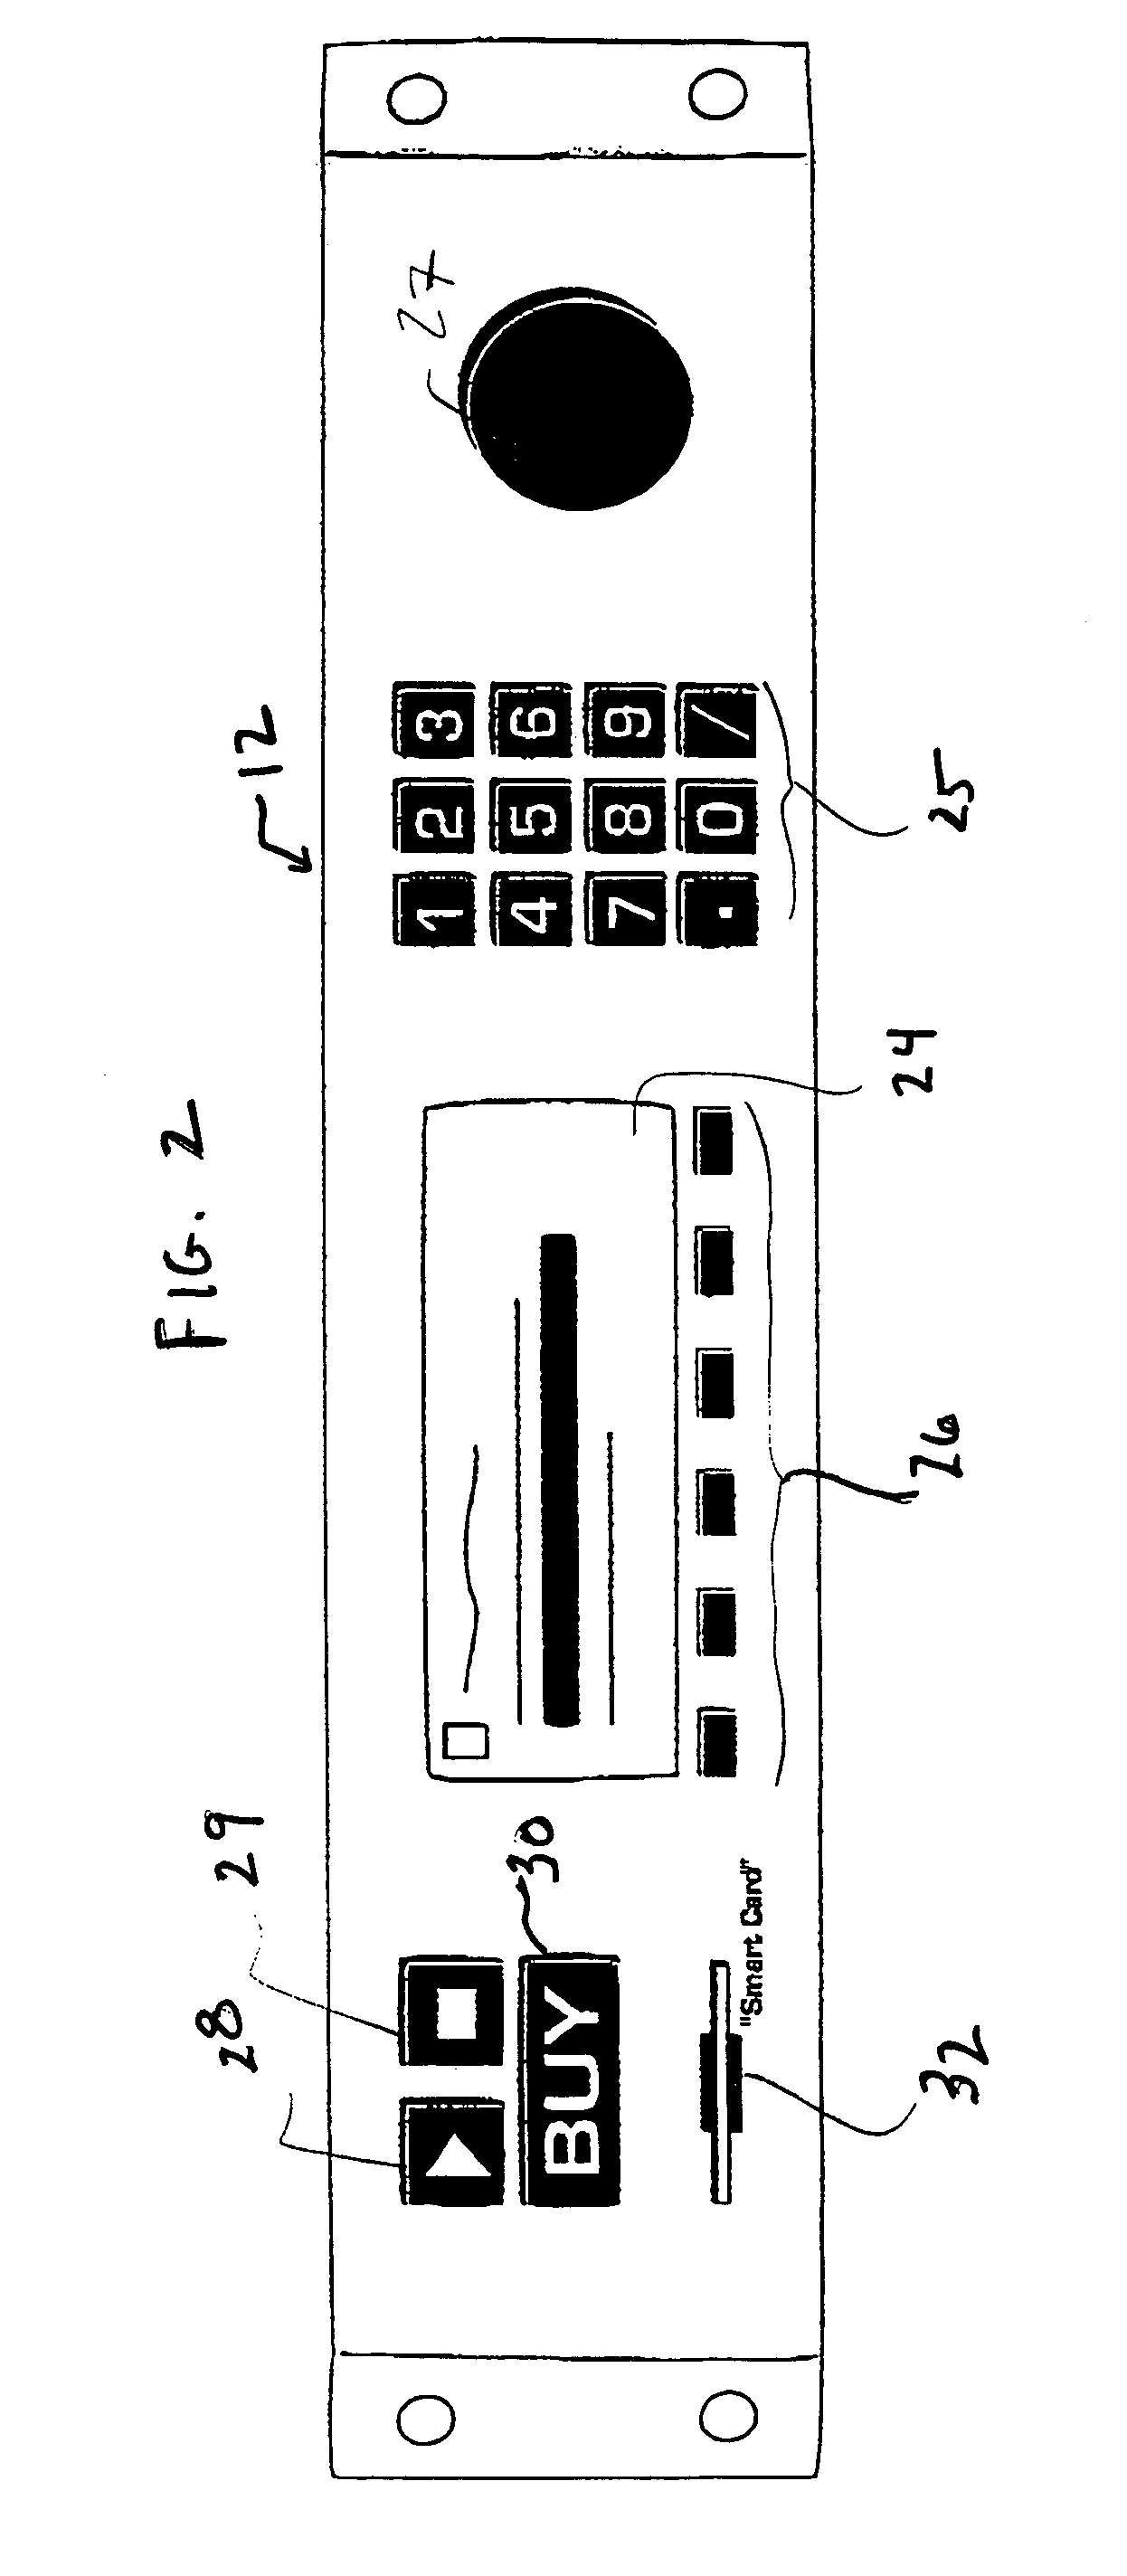 Content distribution system for generating content streams to suit different users and facilitating e-commerce transactions using broadcast content metadata